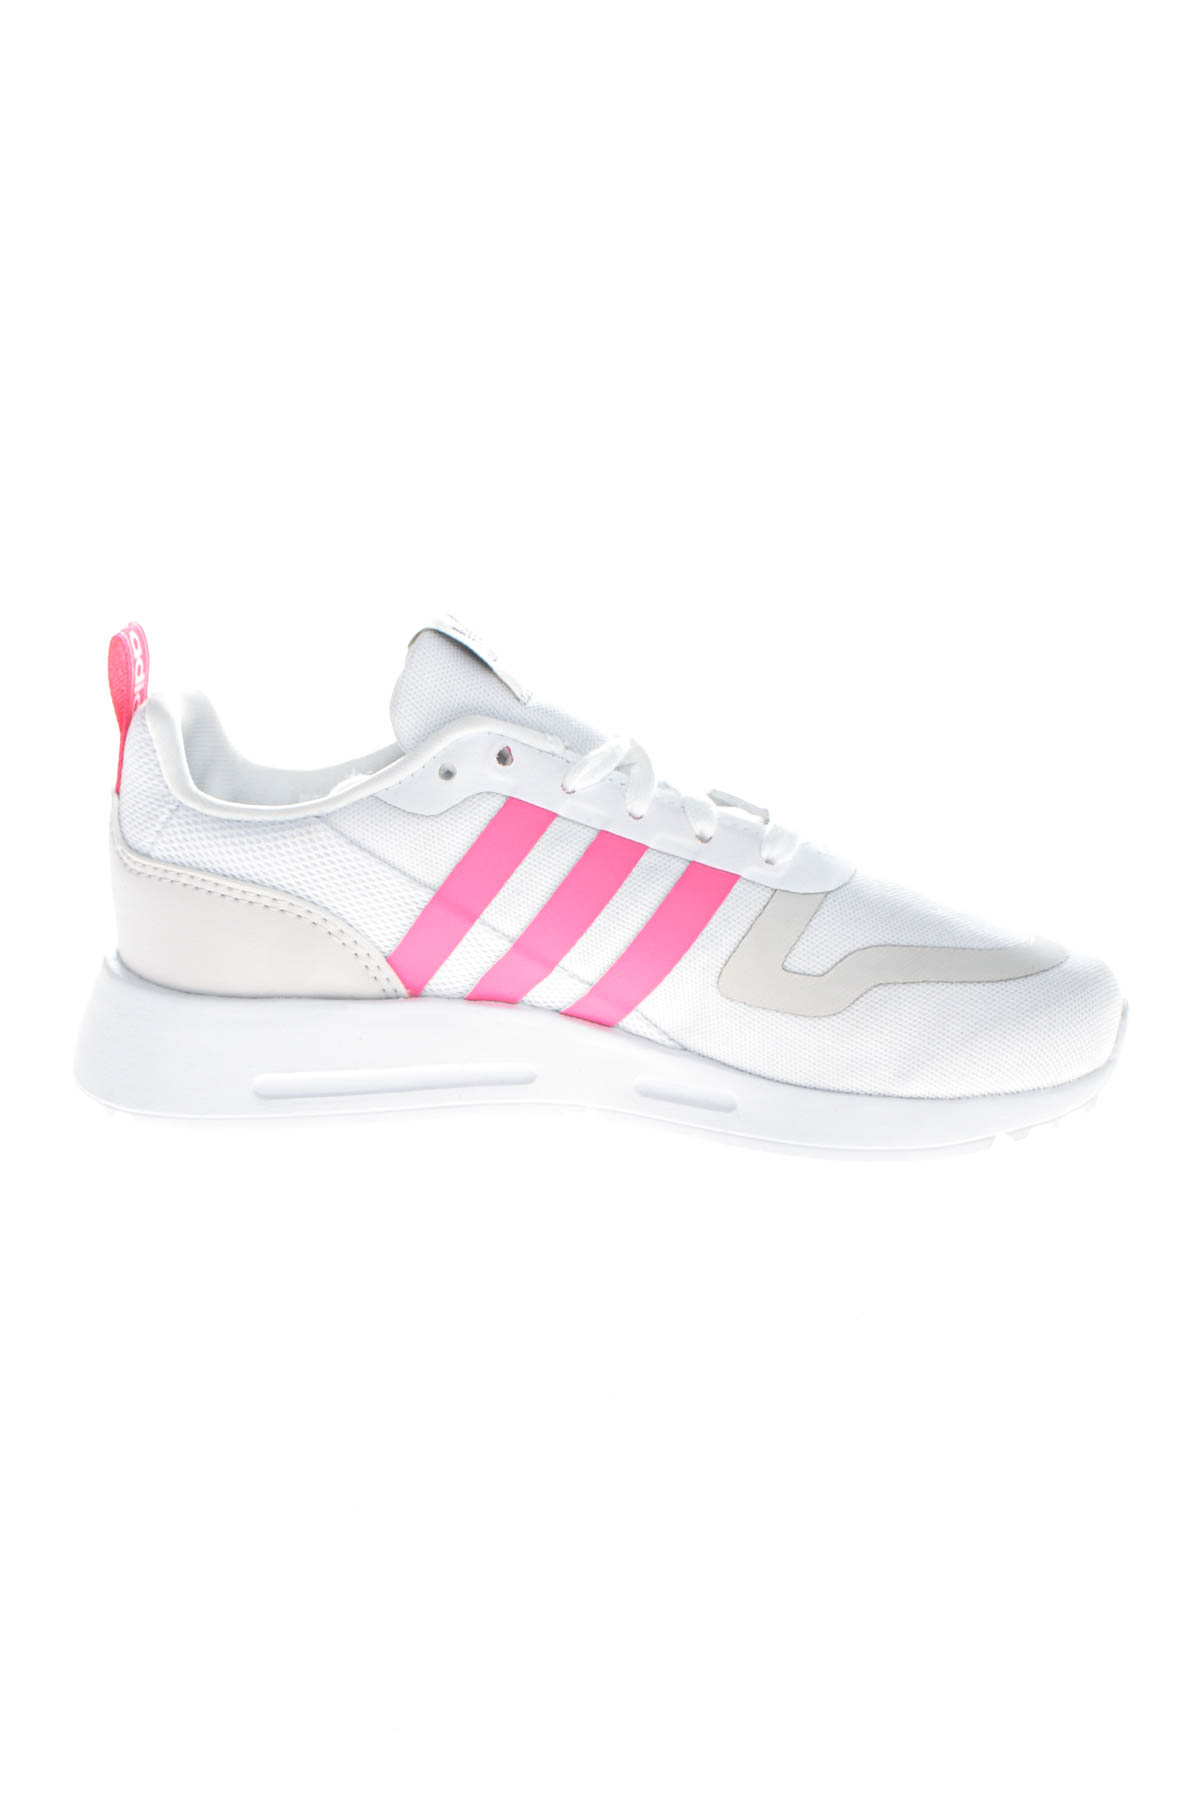 Girl's shoes - Adidas - 2